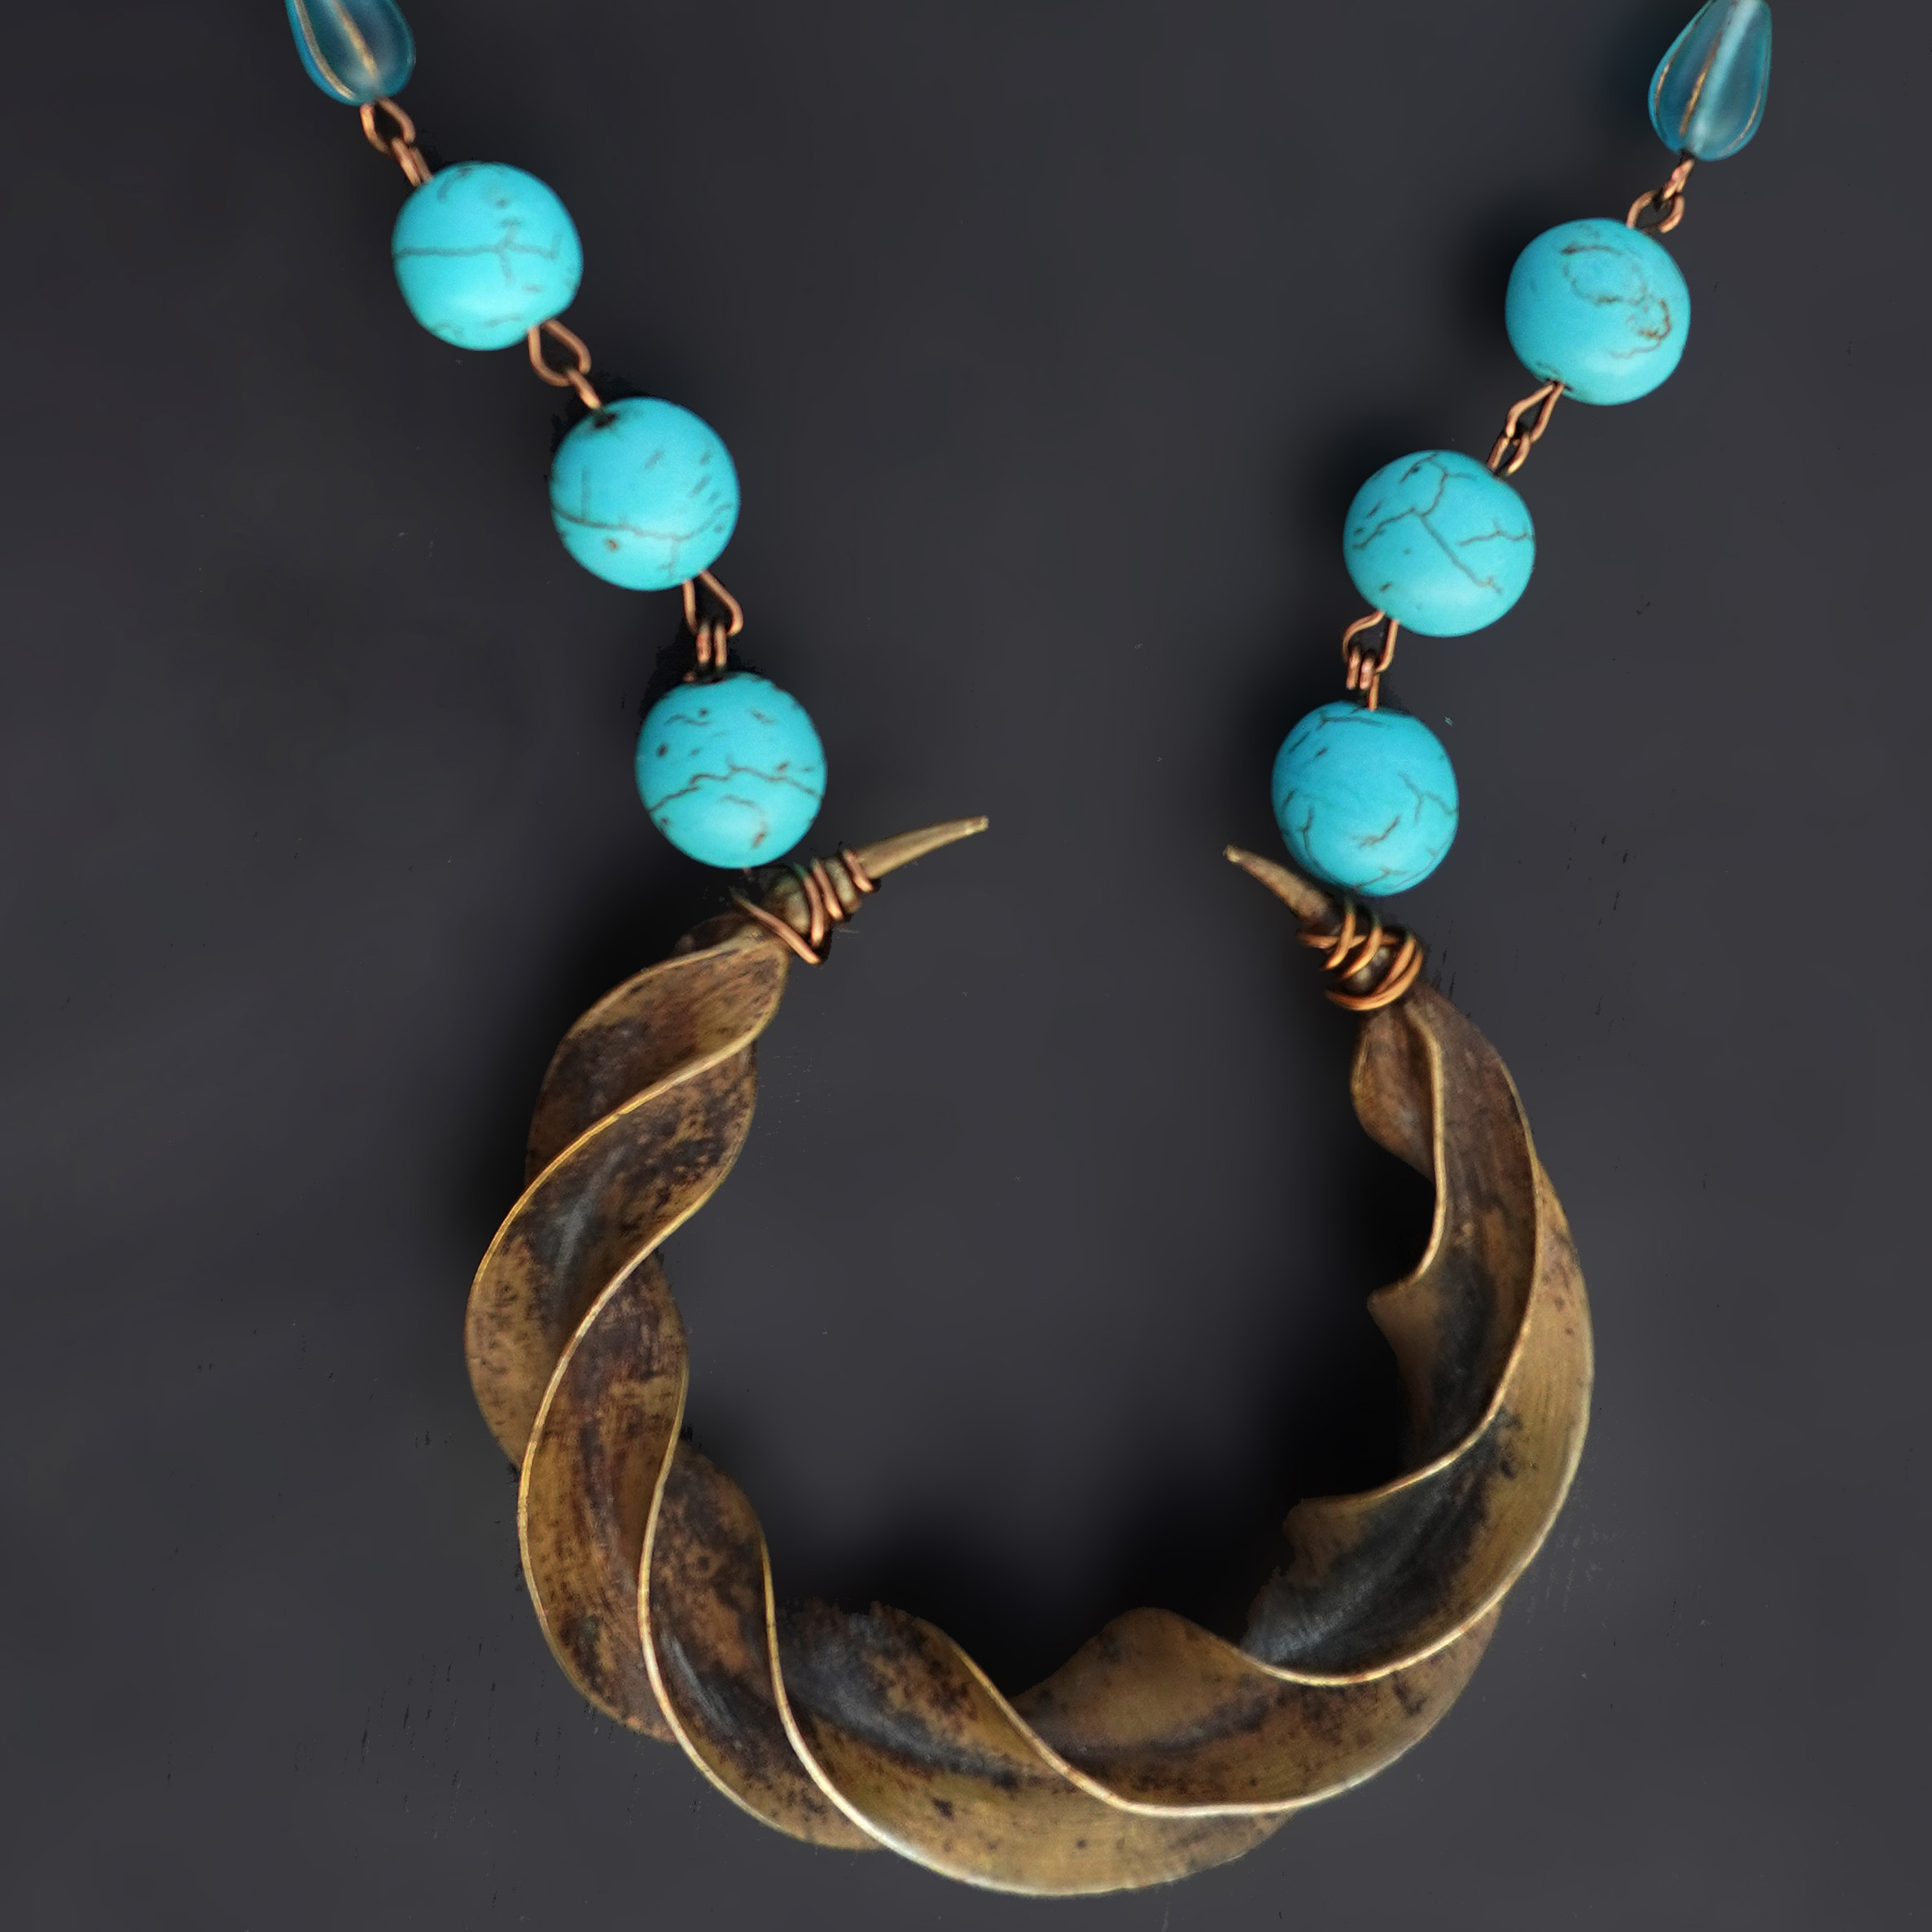 Turquoise necklace with a bronze Fulani earring